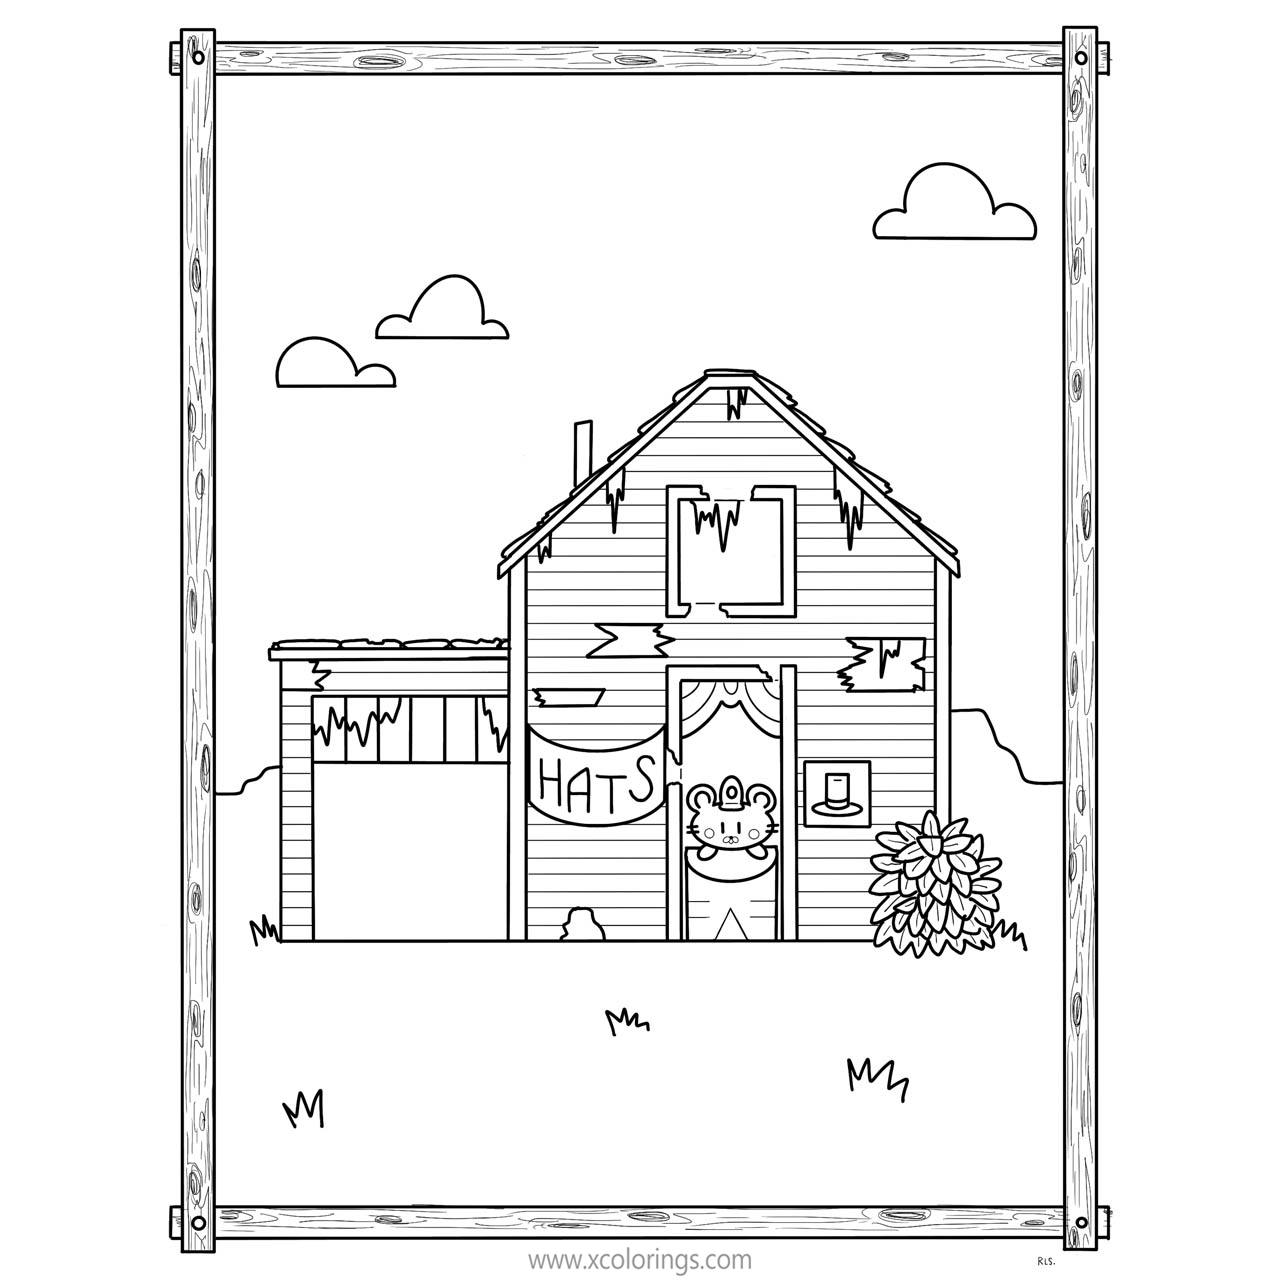 Free Stardew Valley Coloring Pages by RobynSmith printable